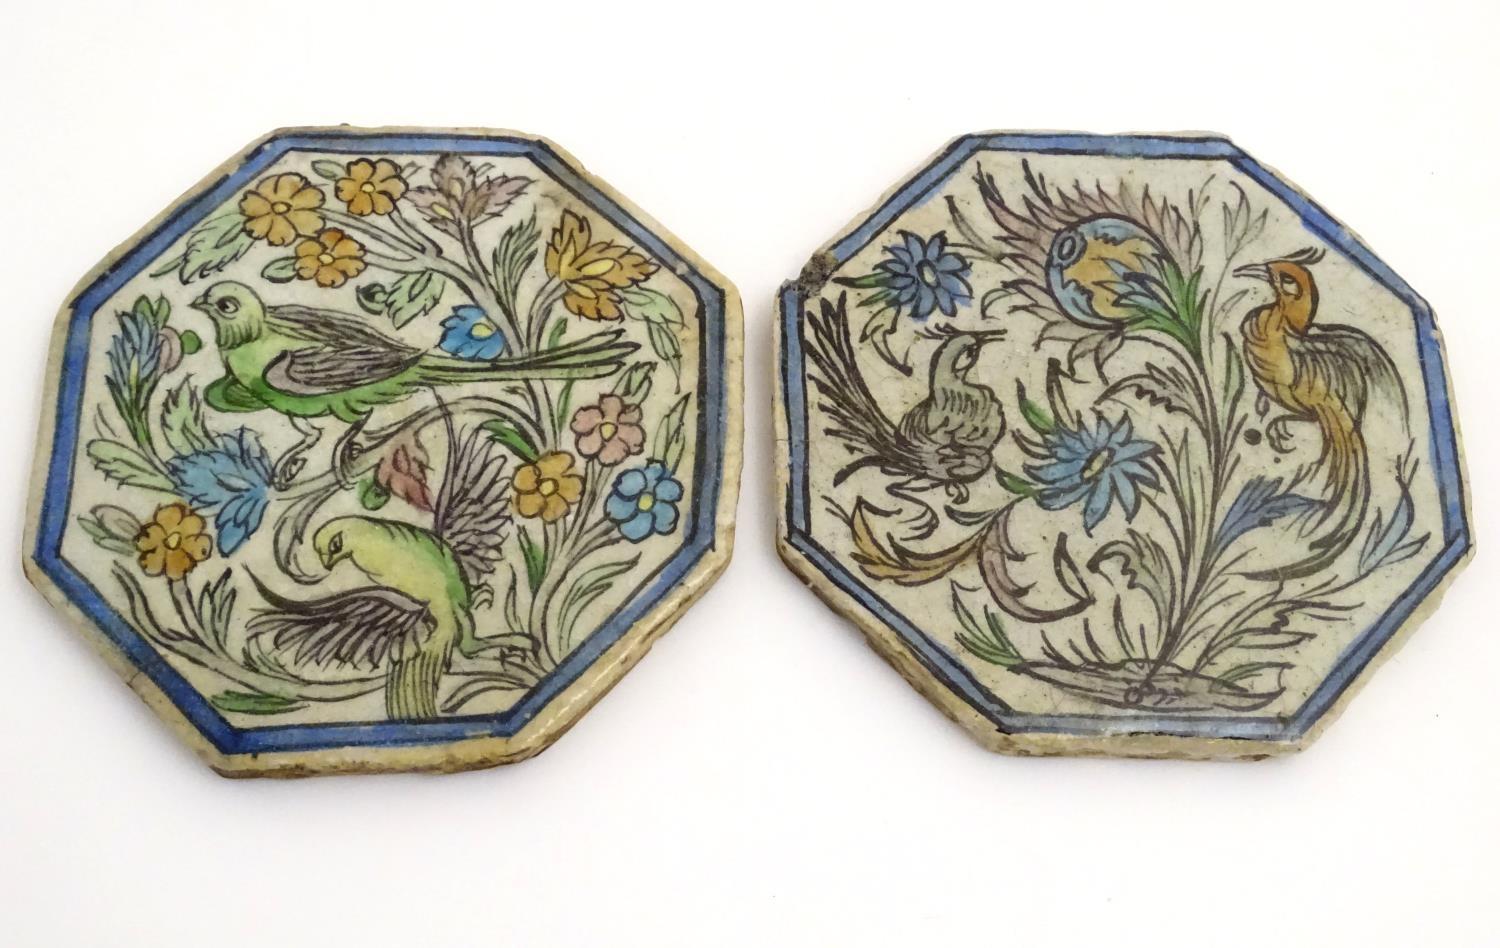 Two Persian tiles of octagonal form decorated with stylised birds and flowers within a blue